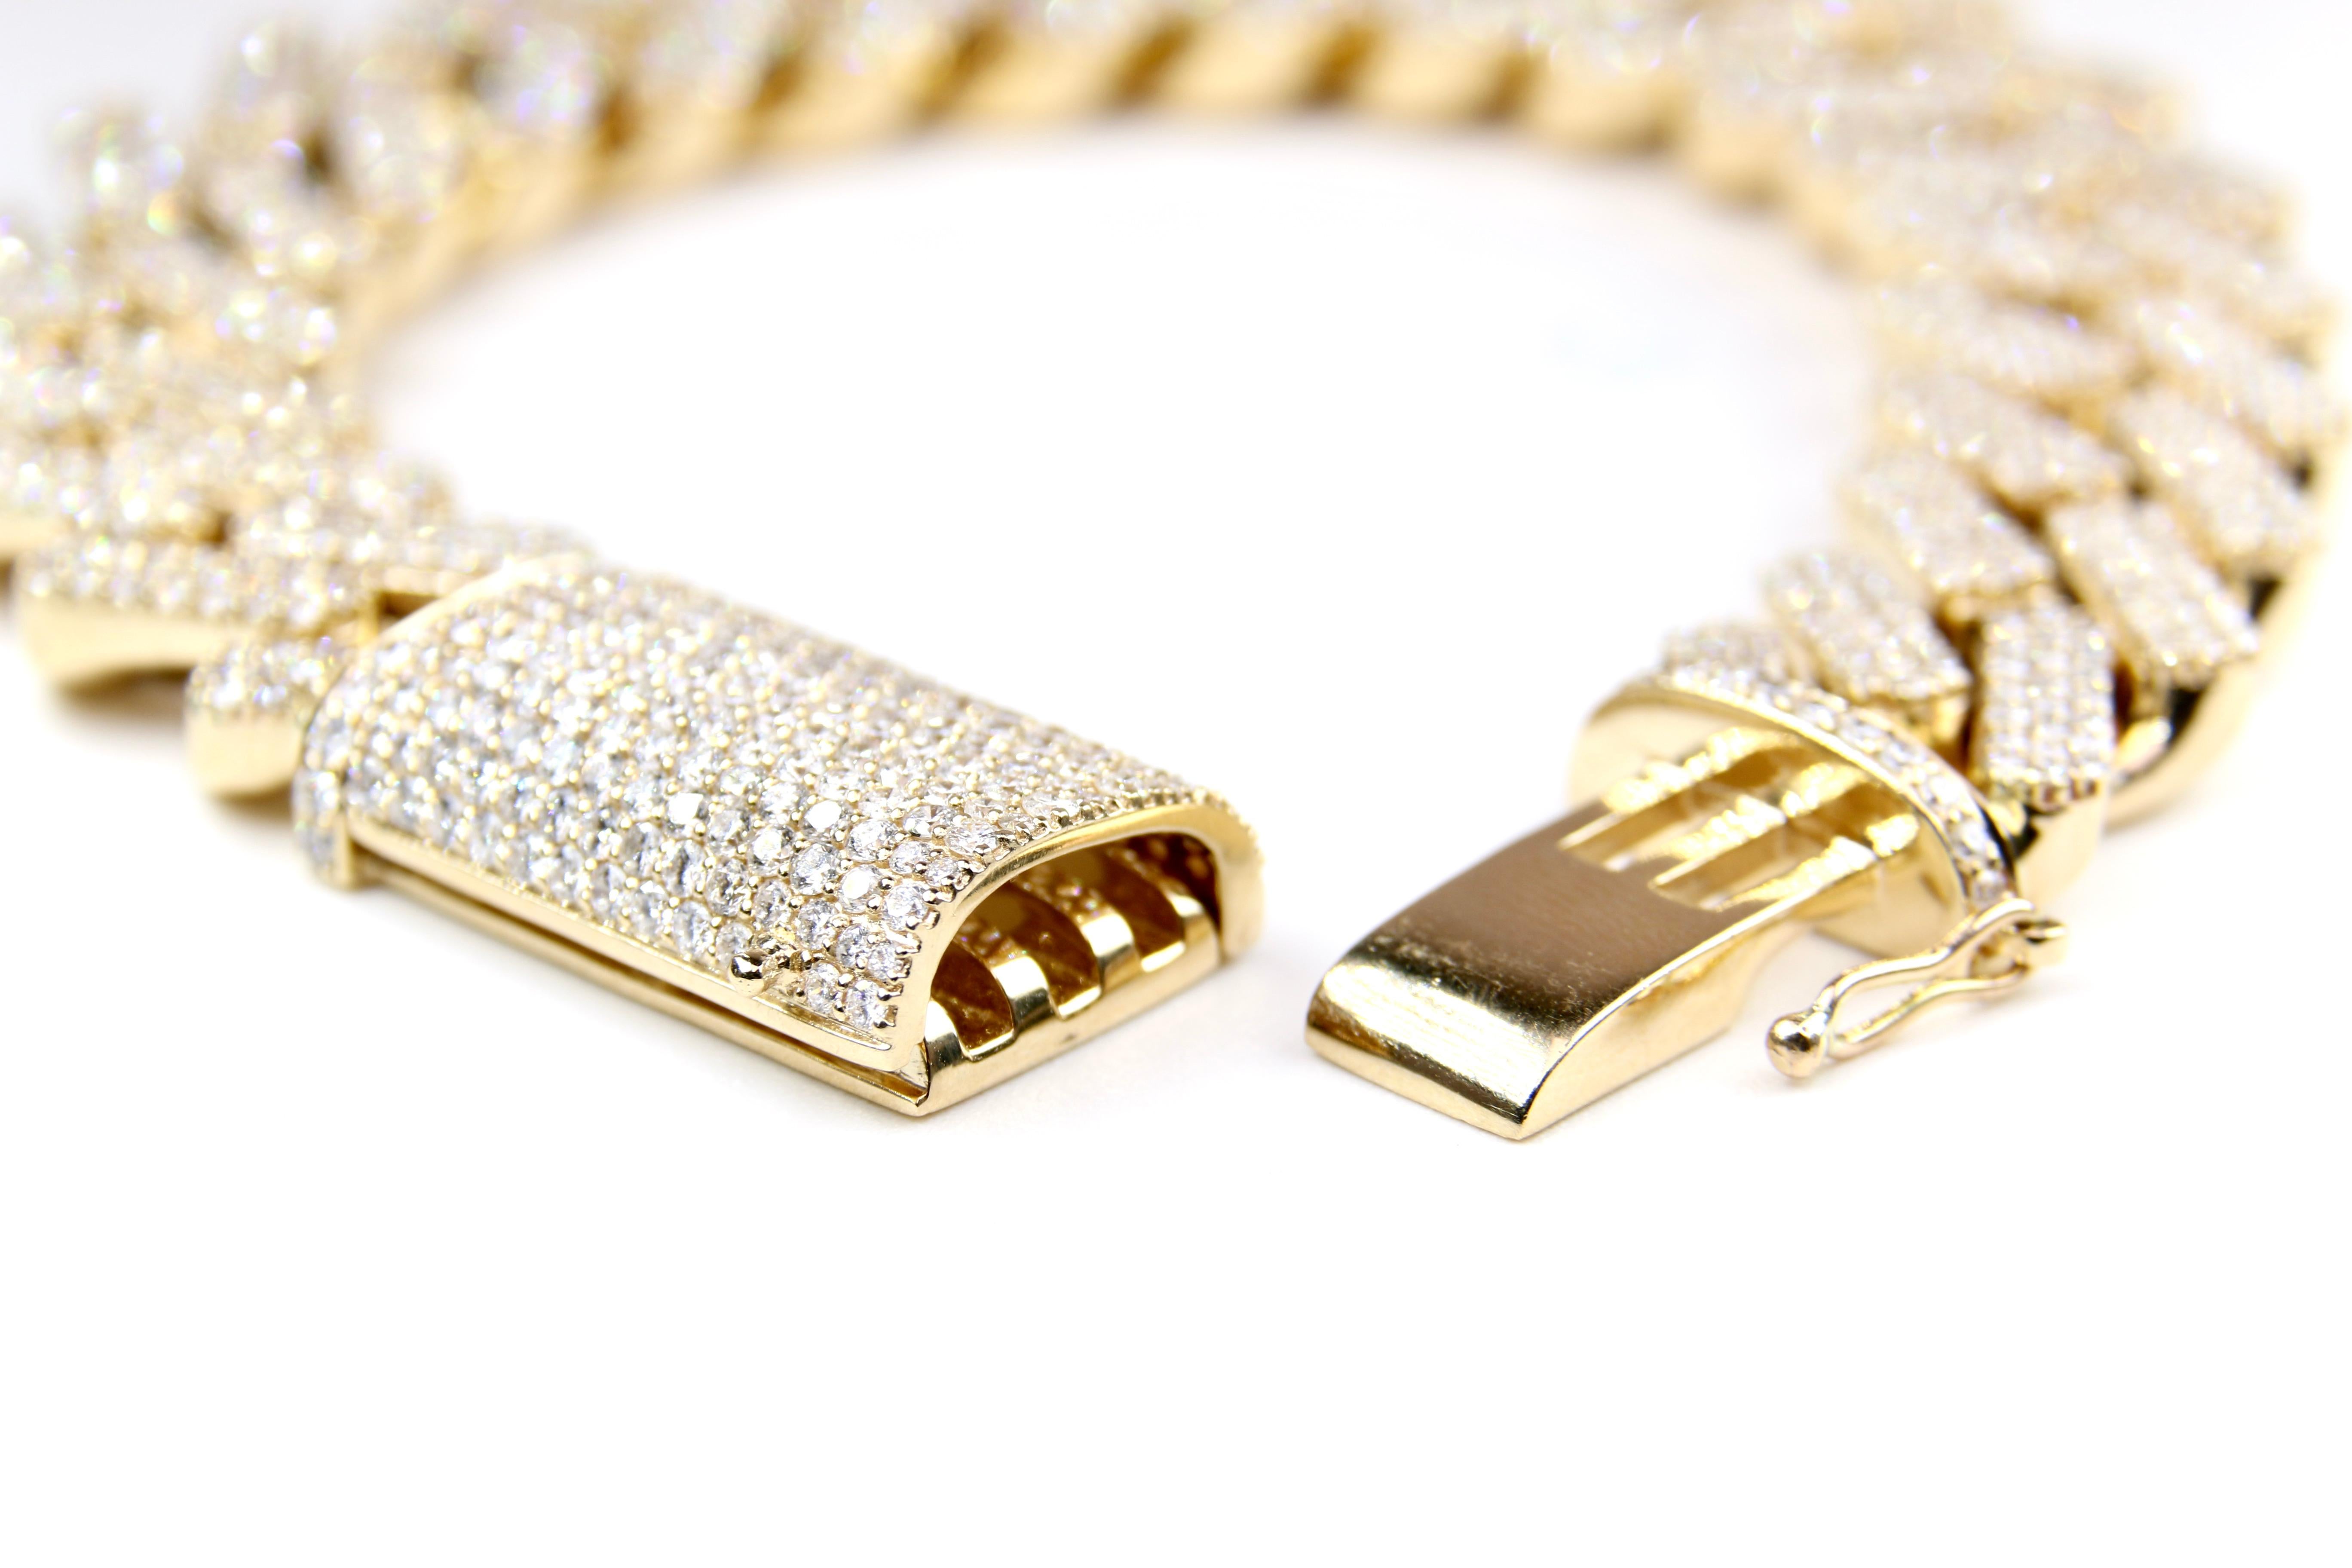 This exquisite 18K Yellow Gold and Diamond Pave Curb Link Bracelet featuring
9.68CT Pave Diamonds is an absolutely stunning piece. This beautiful bracelet of Yellow Gold and diamonds is a statement on your wrist. With over 9.5 CT of Pave diamonds